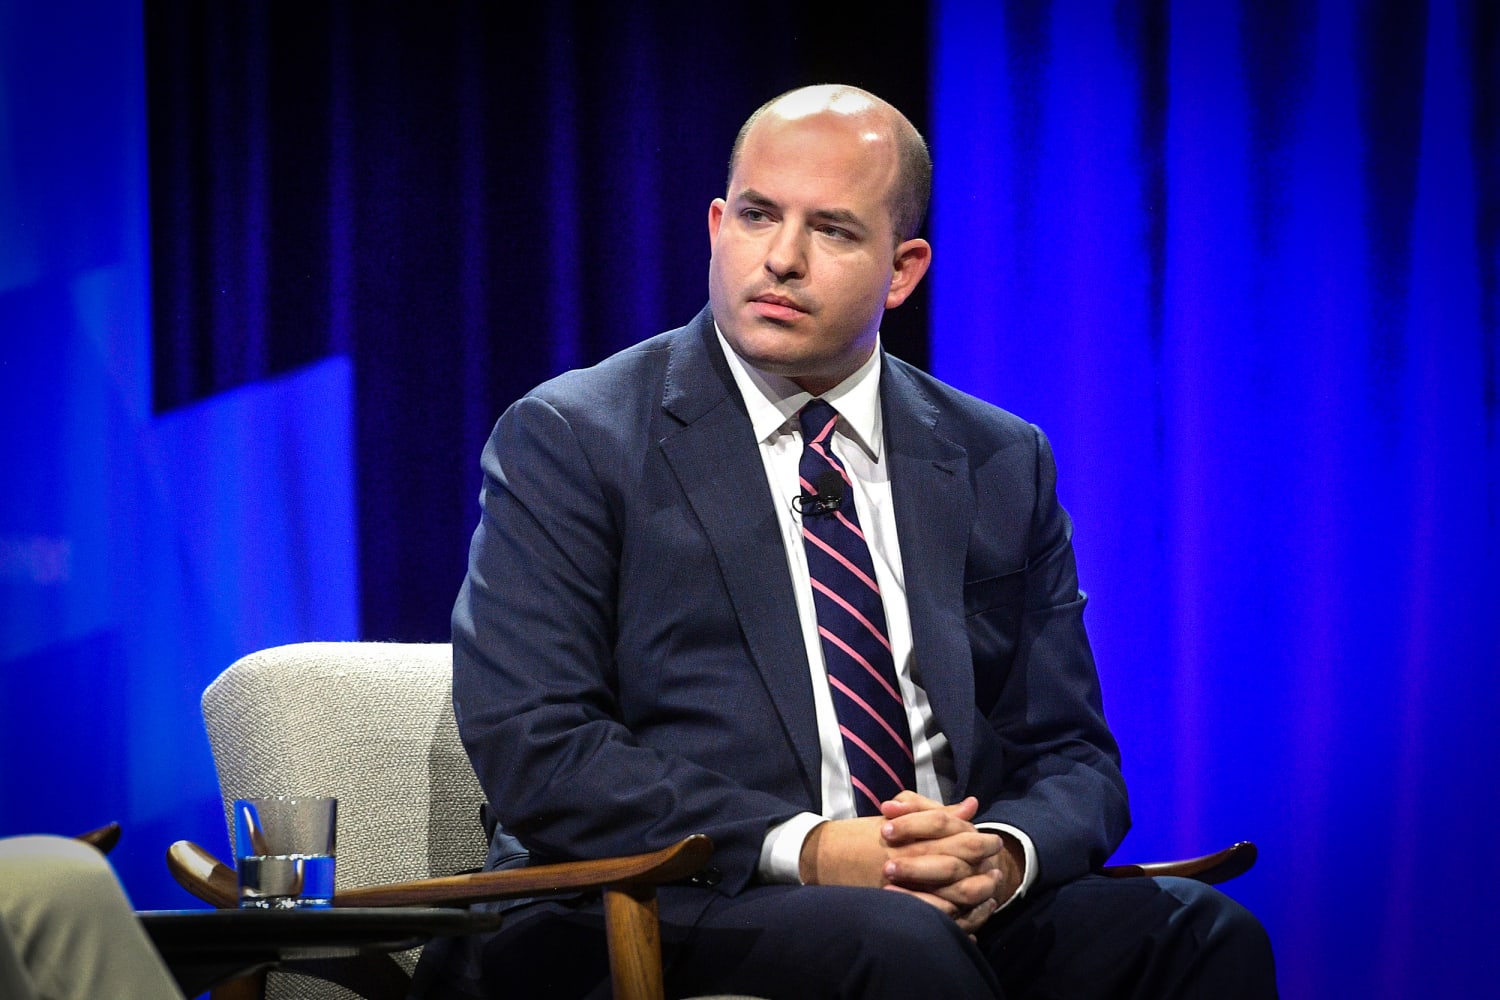 Brian Stelter is out at CNN